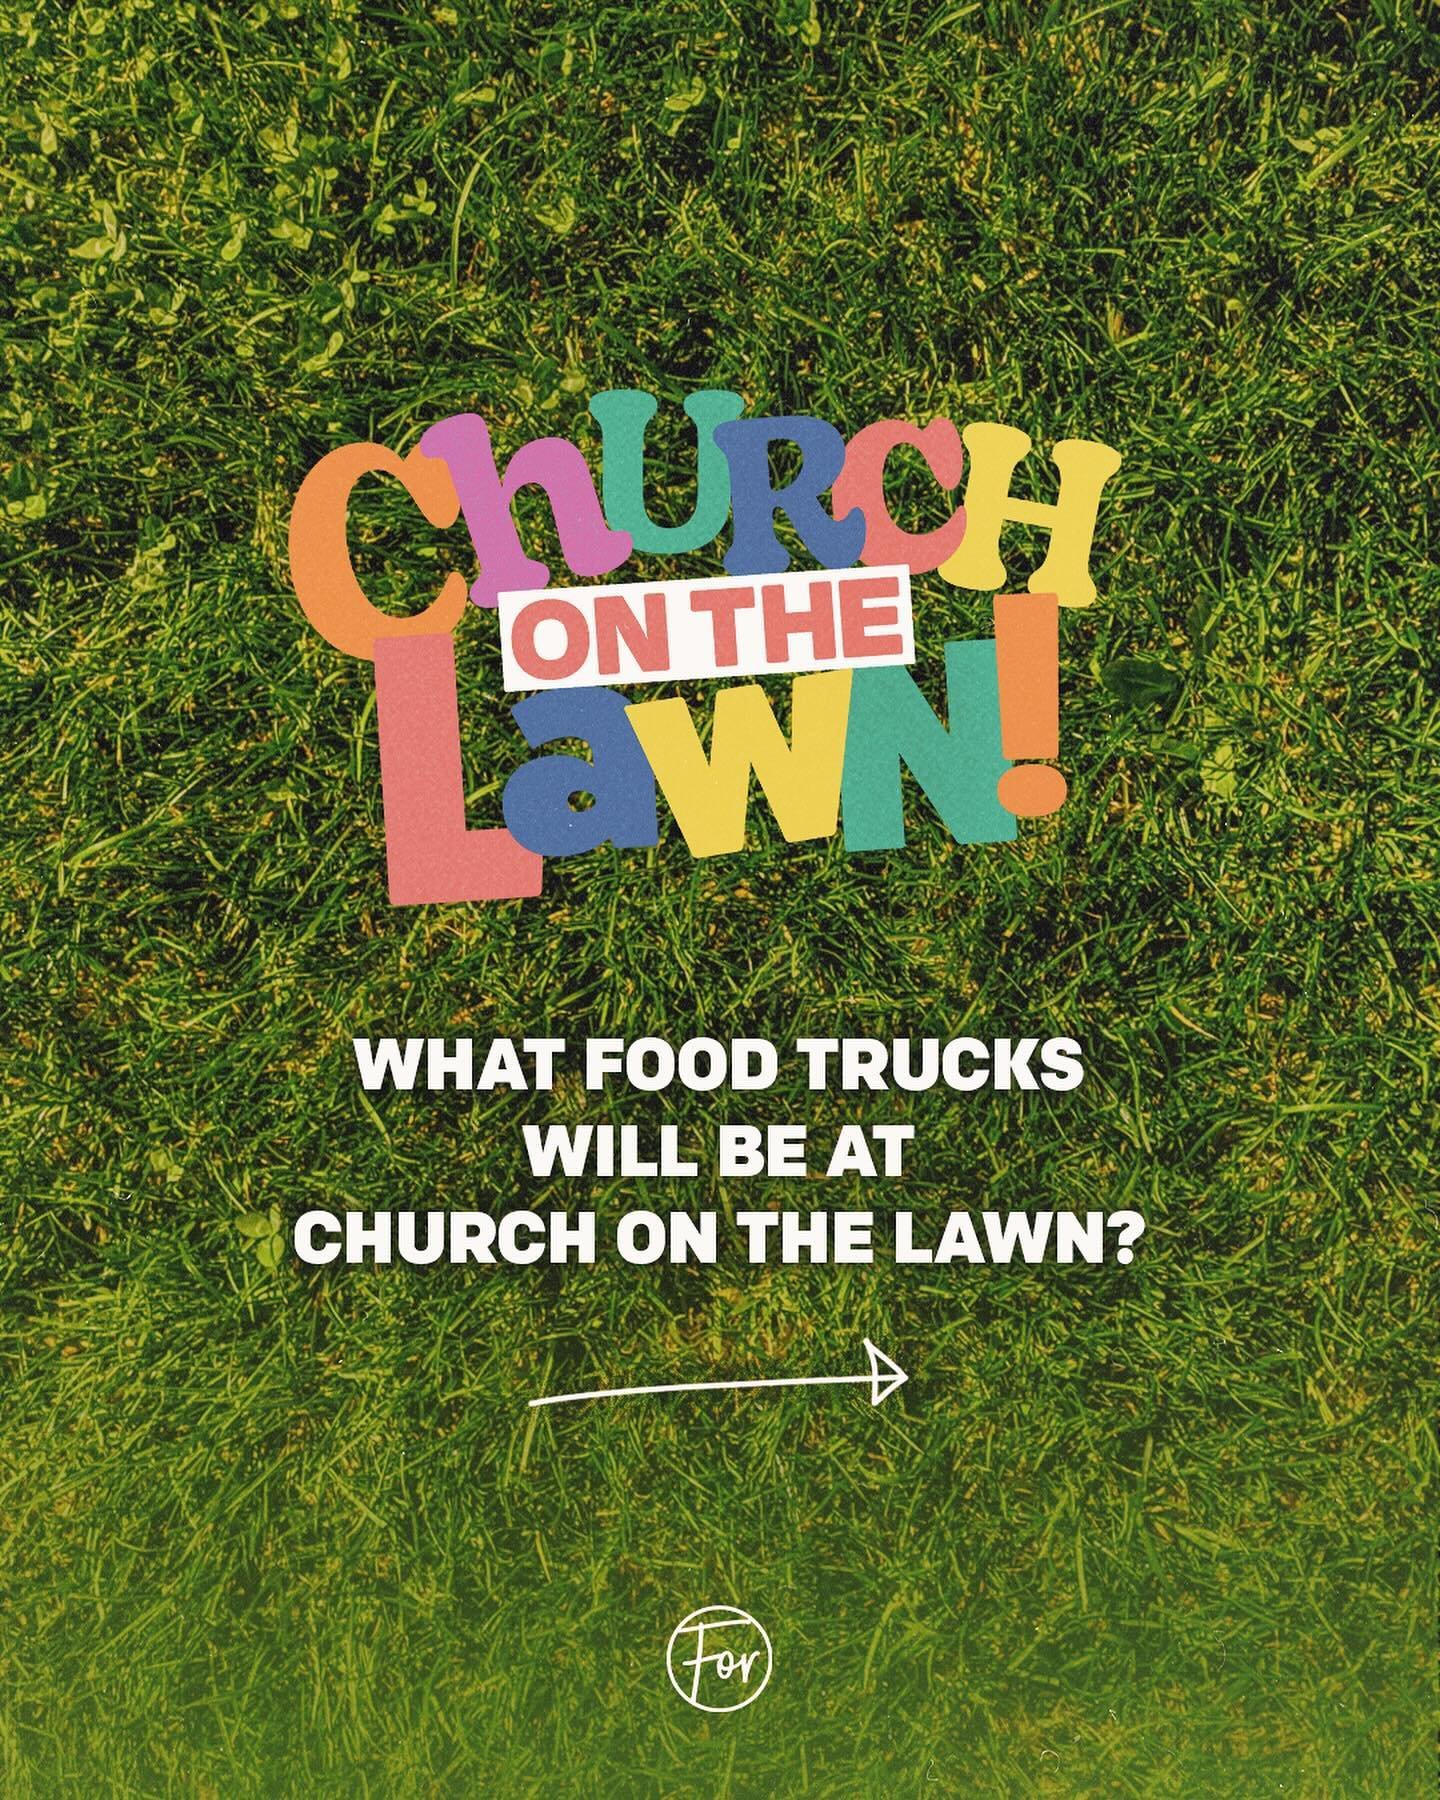 Some of our favorite local flavors will be at Church on the Lawn this Sunday morning. Come to church hungry and ready to hang out!

🦍Quesadilla Gorilla | @quesadillagorilla
🌽Valley Corn &amp; Potatoes | @valleycornandpotatoes
🍨Churrocks | @churroc